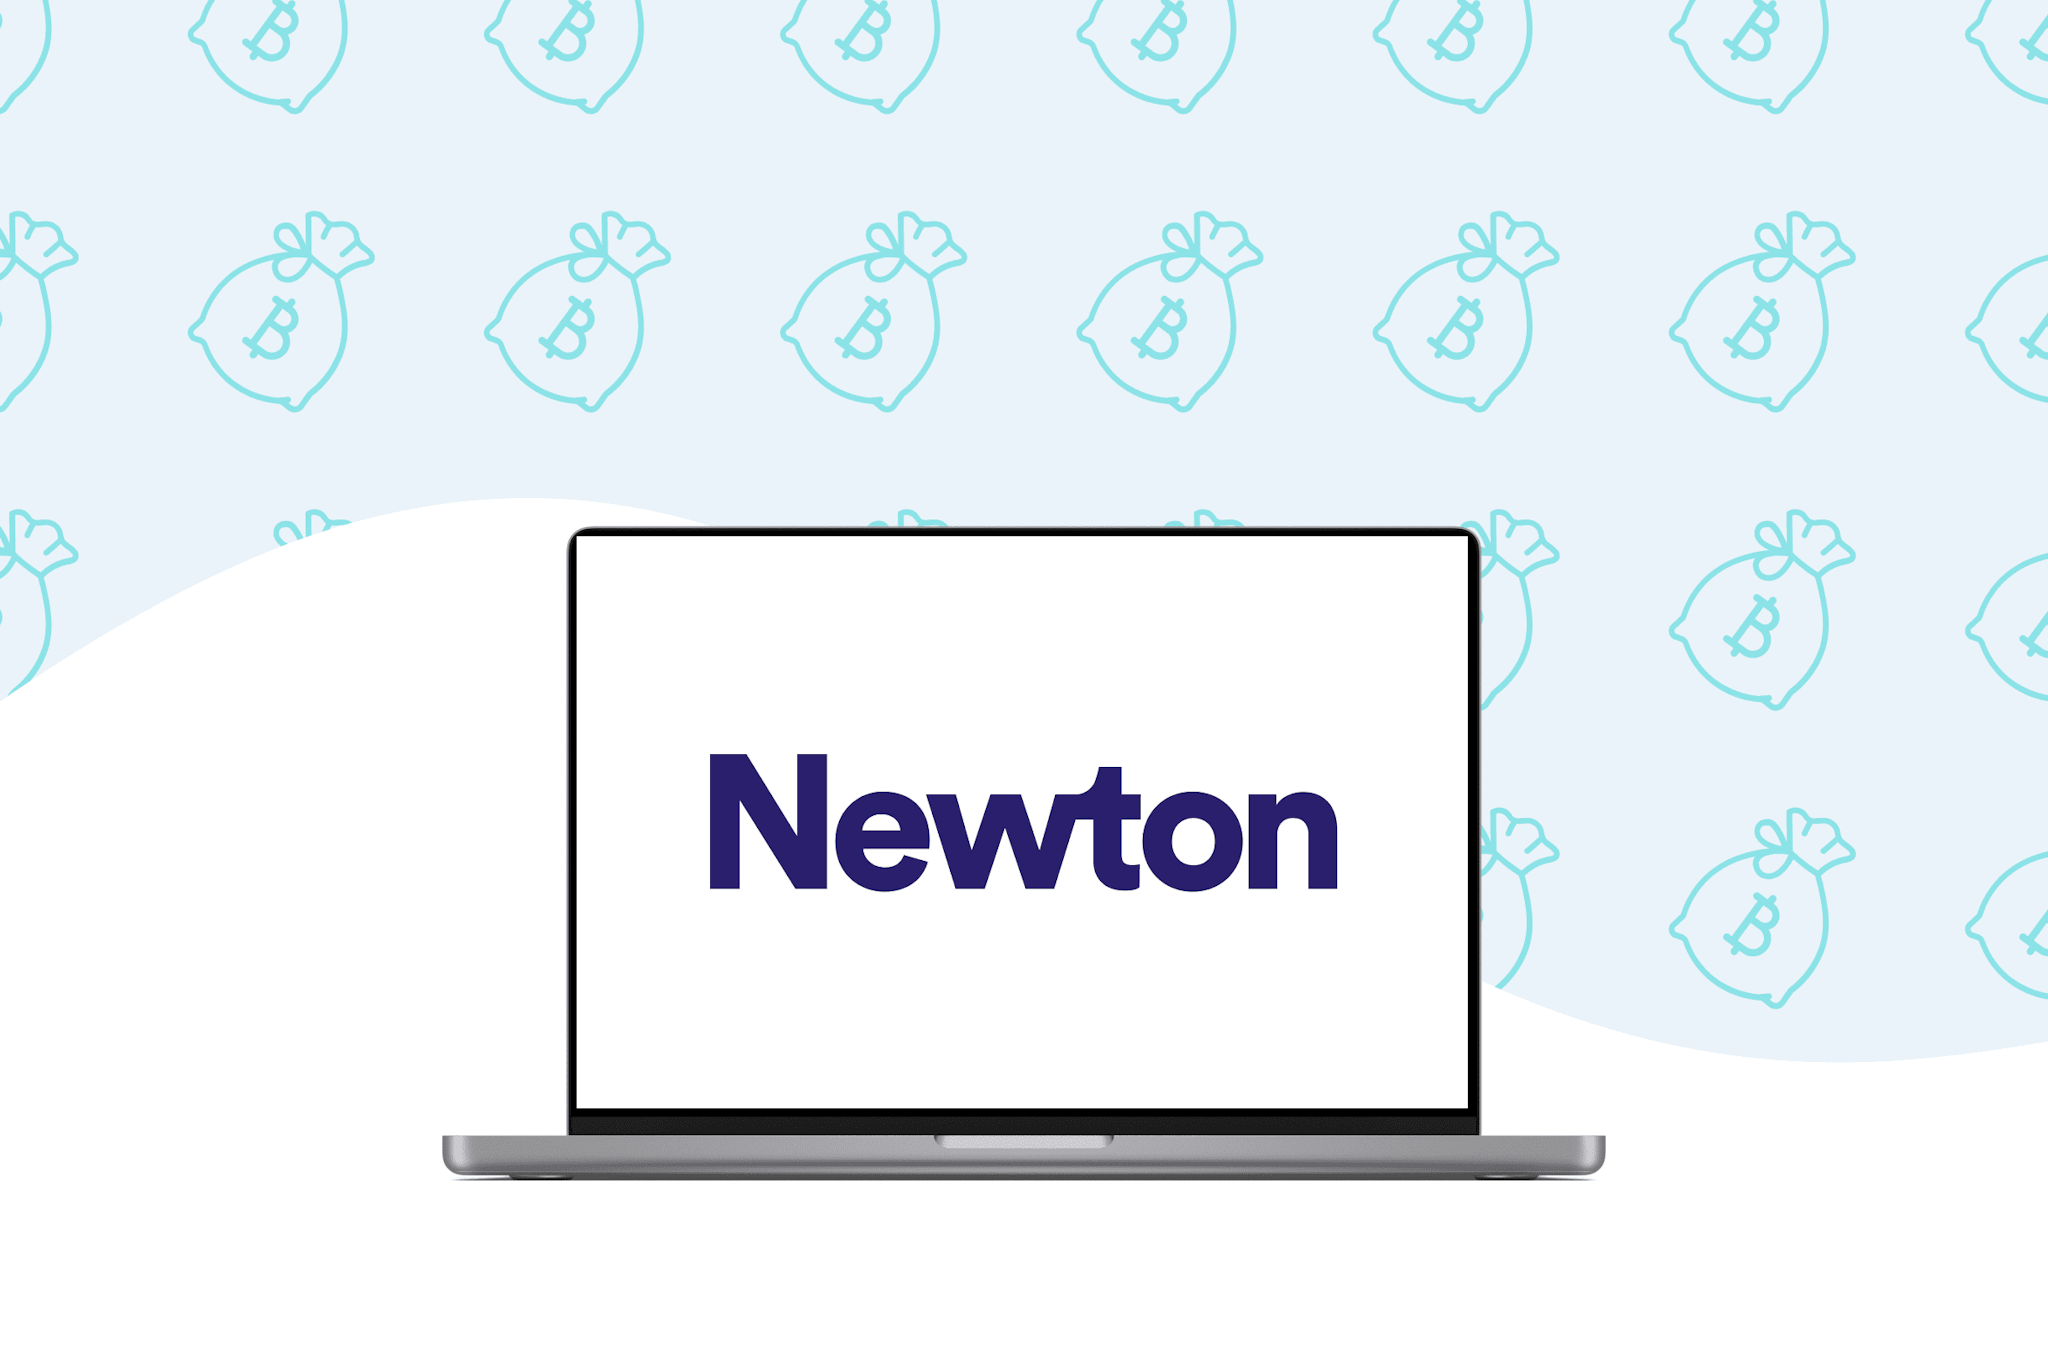 Newton's new logo: a sleek, modern design featuring an apple silhouette, symbolizing innovation and scientific discovery.